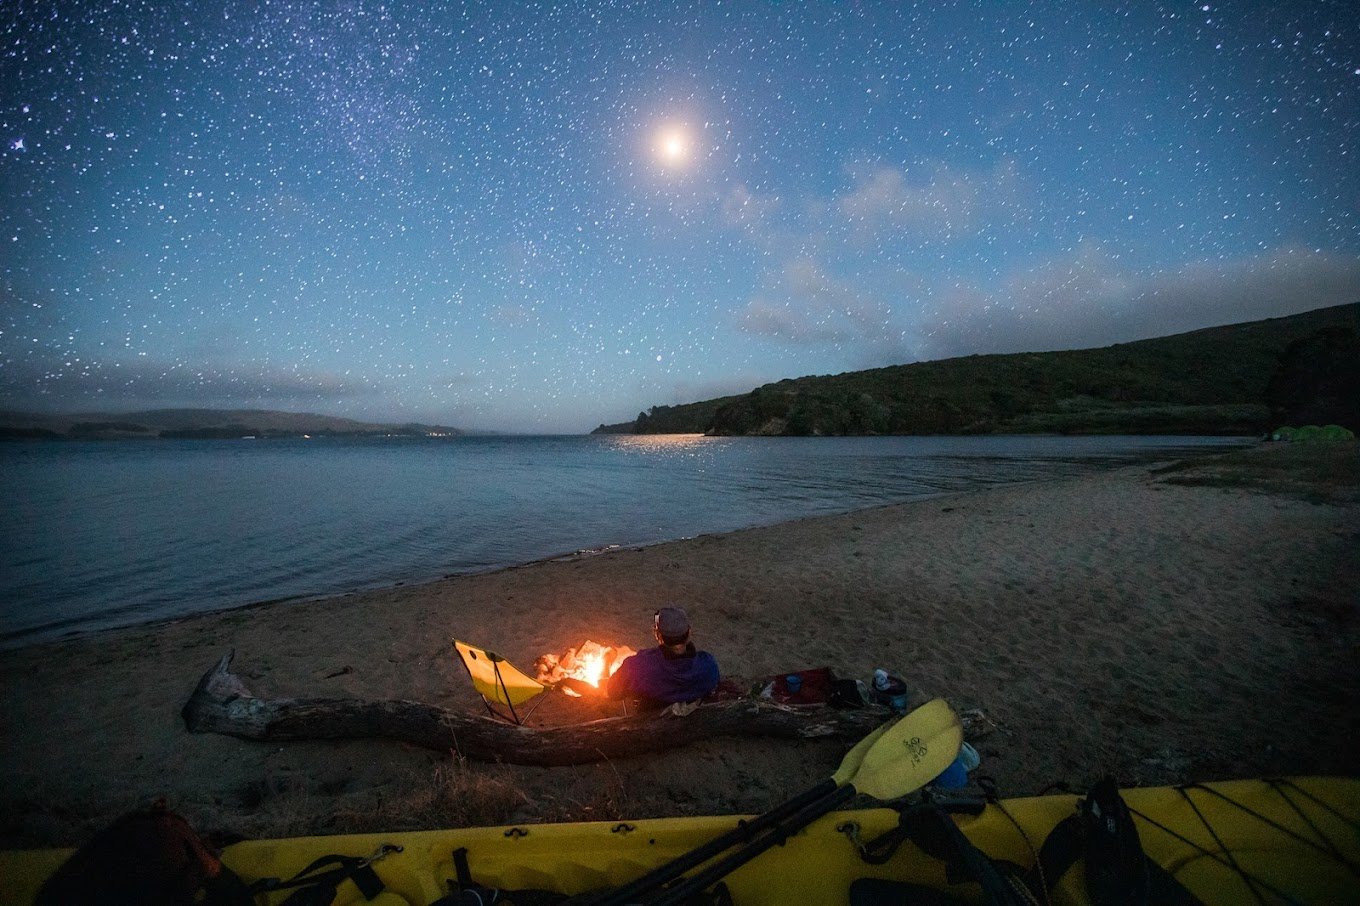 Kayaker On Beach With Fire At Night